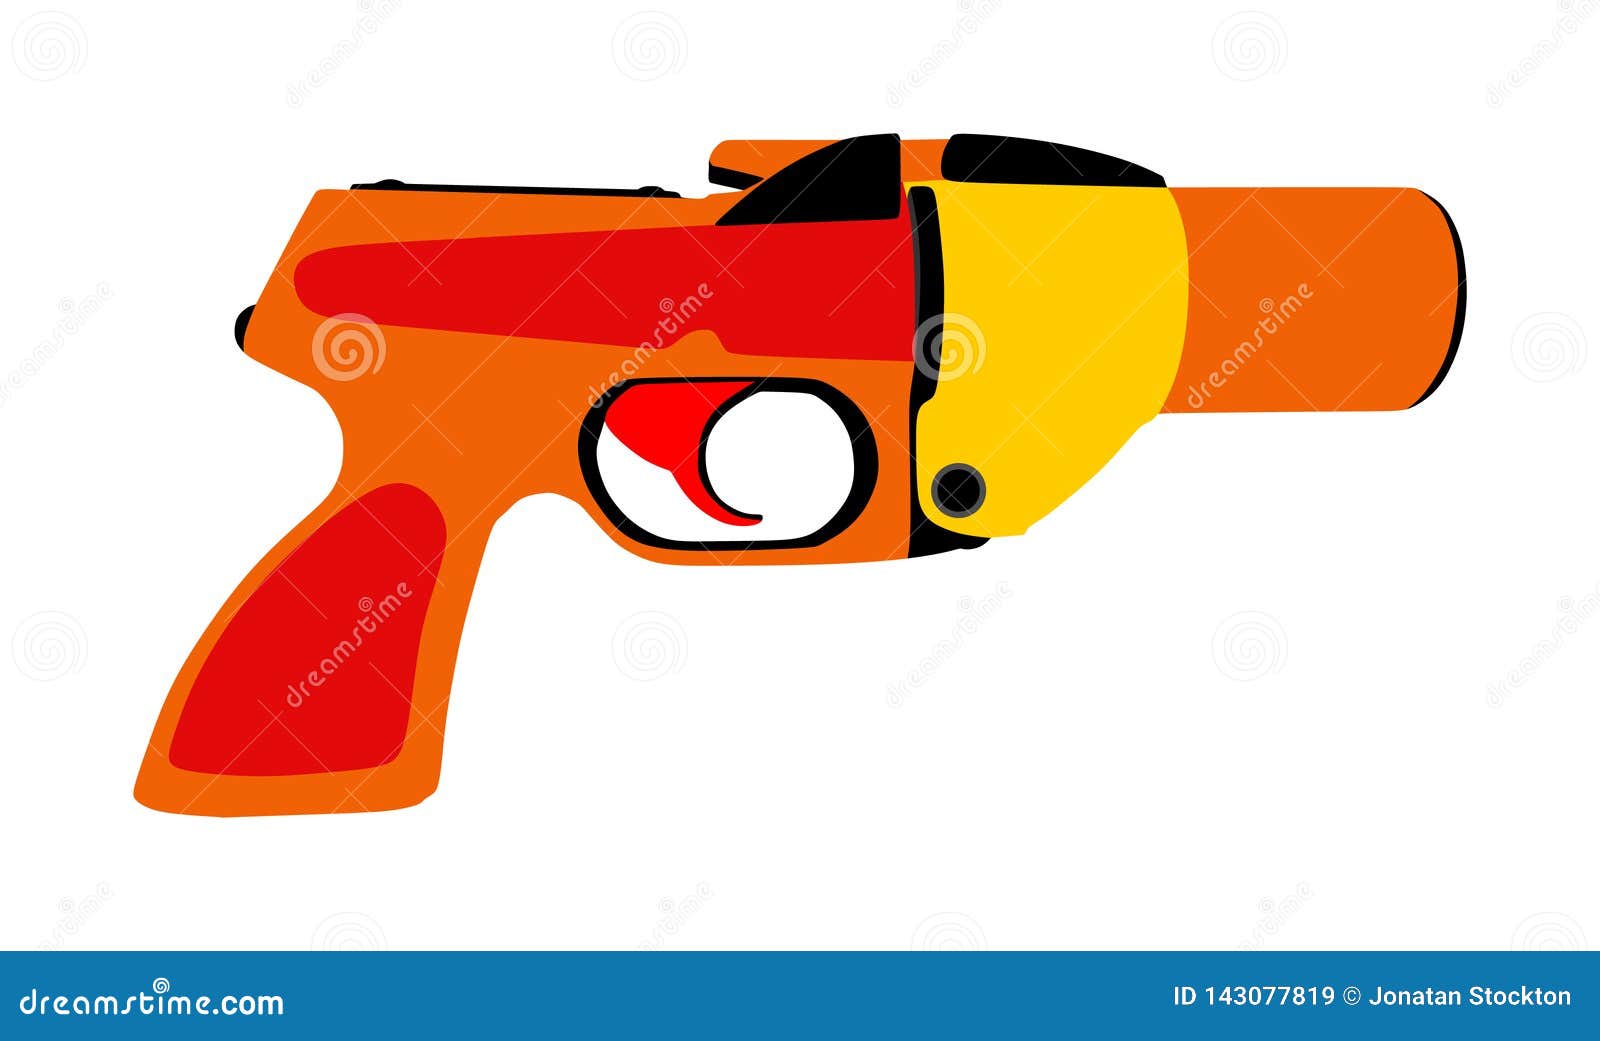 Flare Gun Isolated on White Background. Signal Pistol for Survival